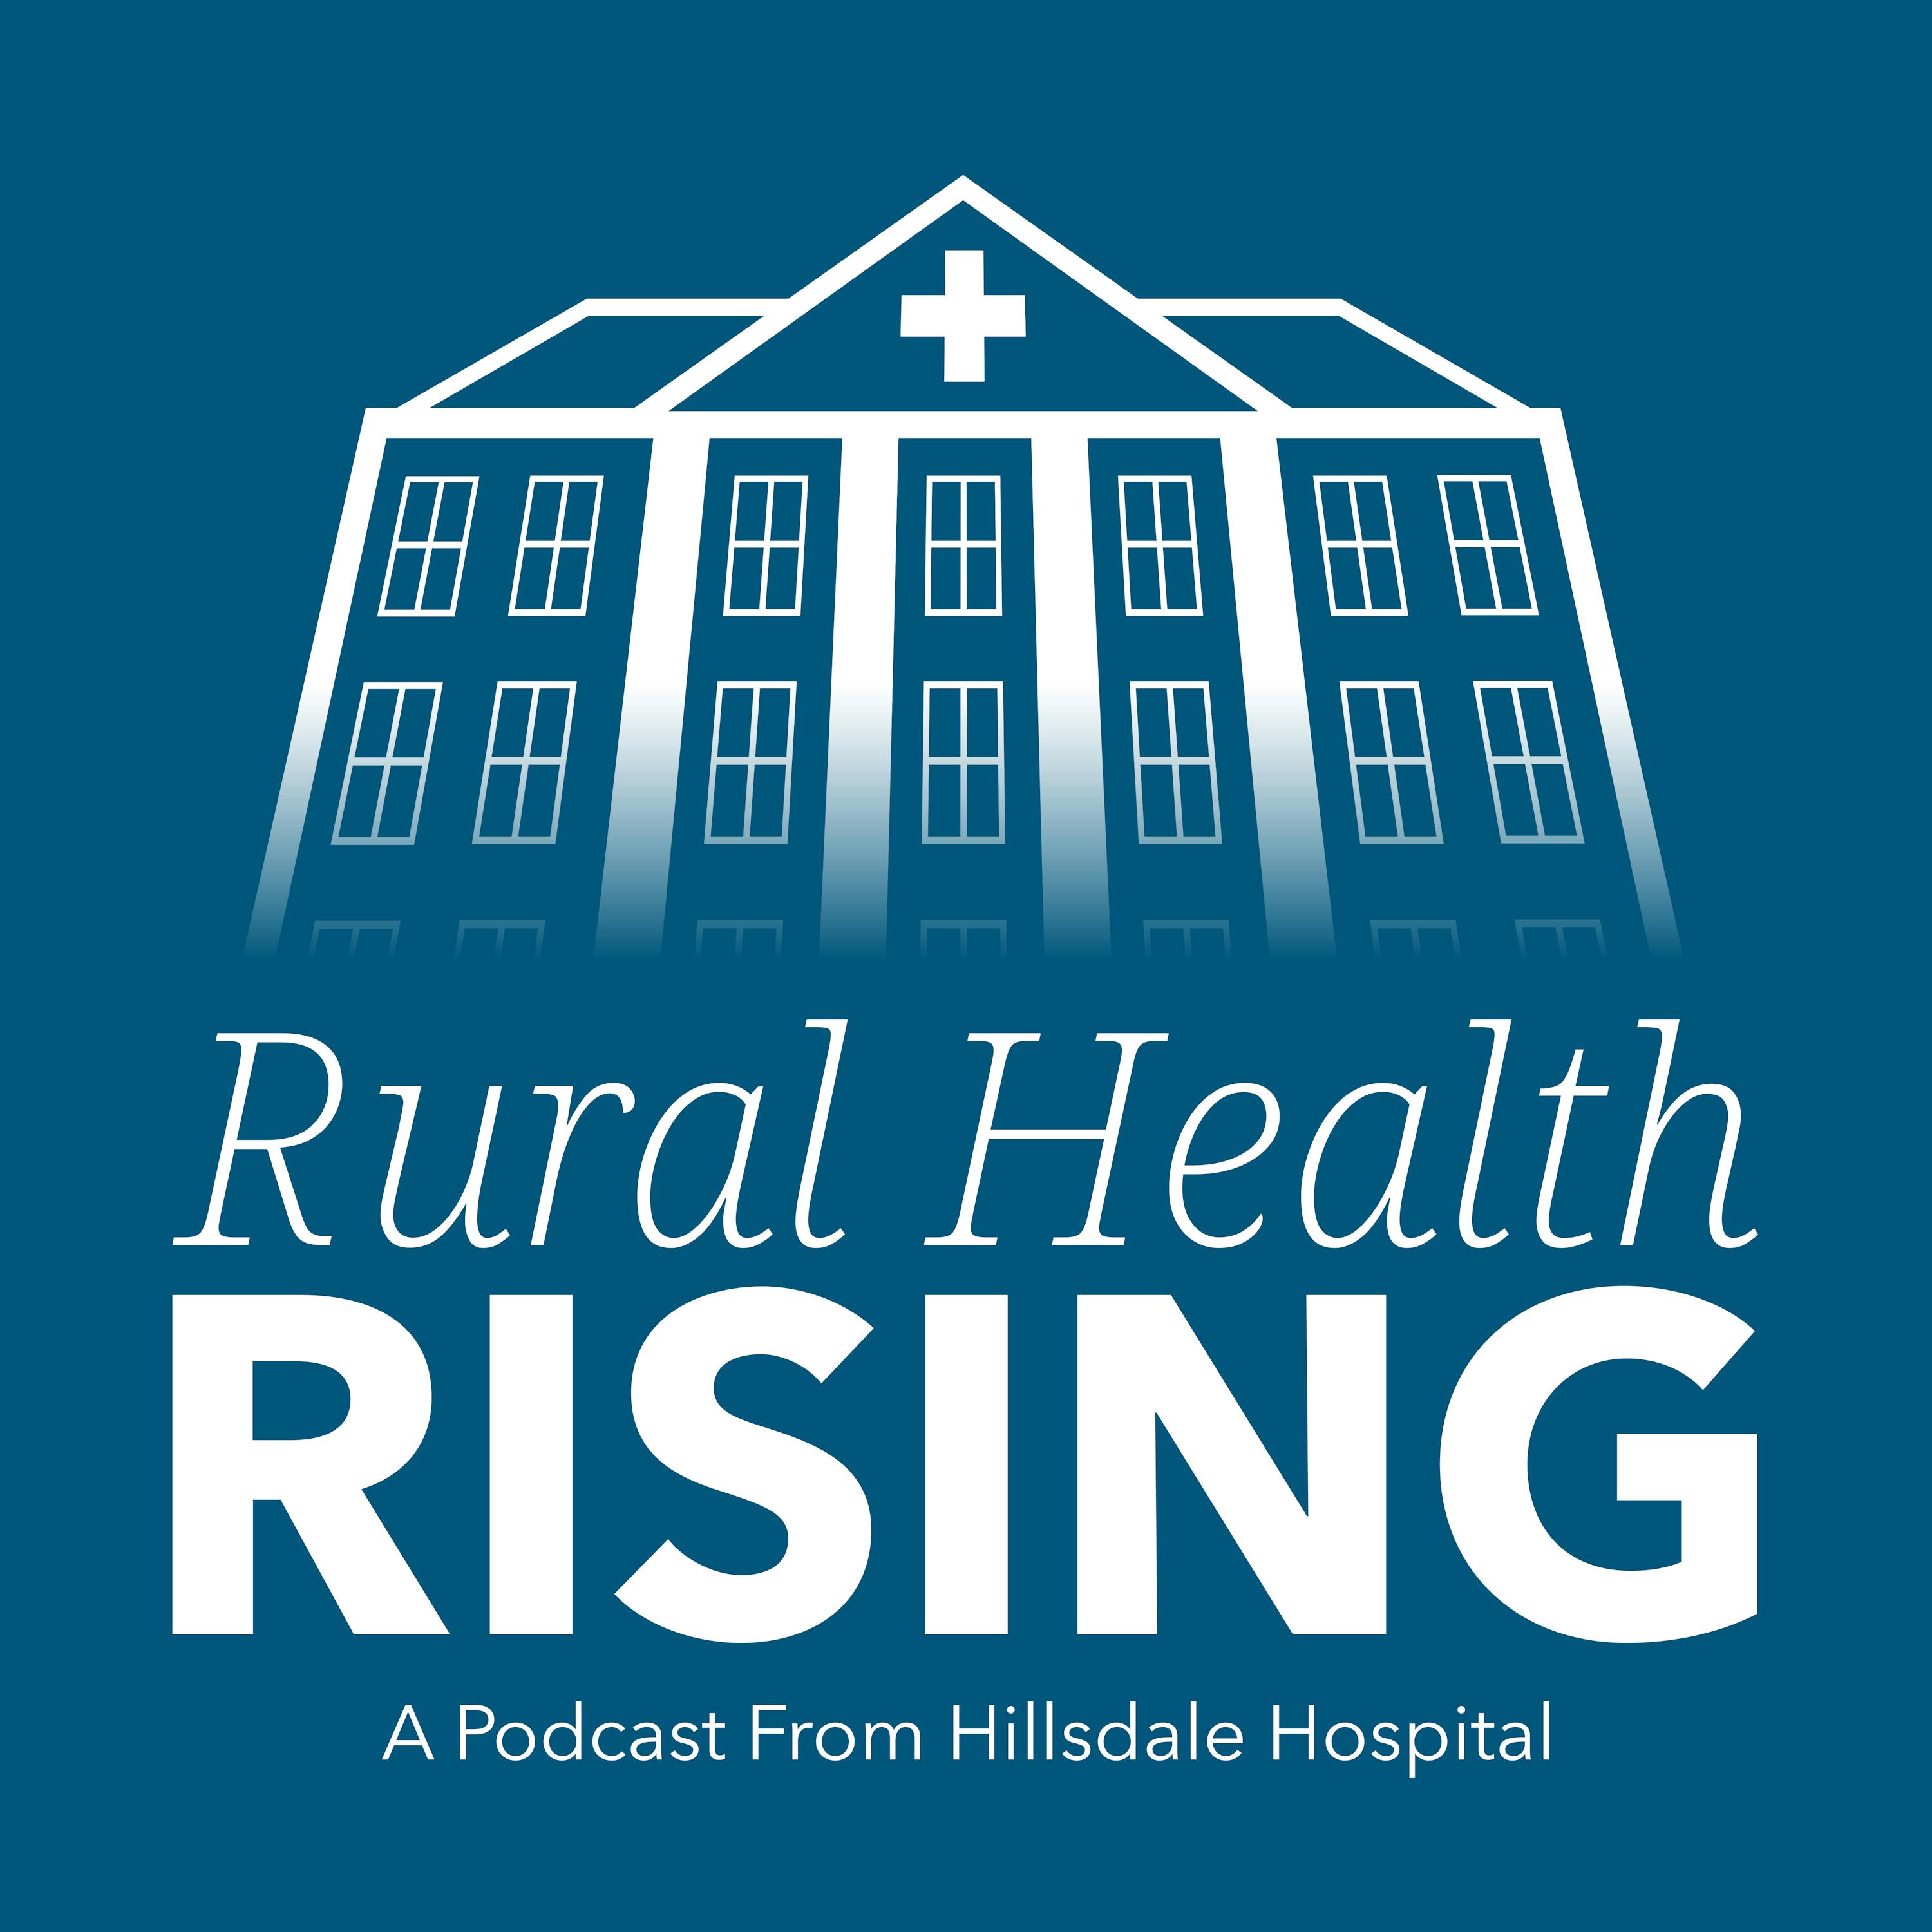 Episode 145: Rural Health Road Trip: The Show-Me State